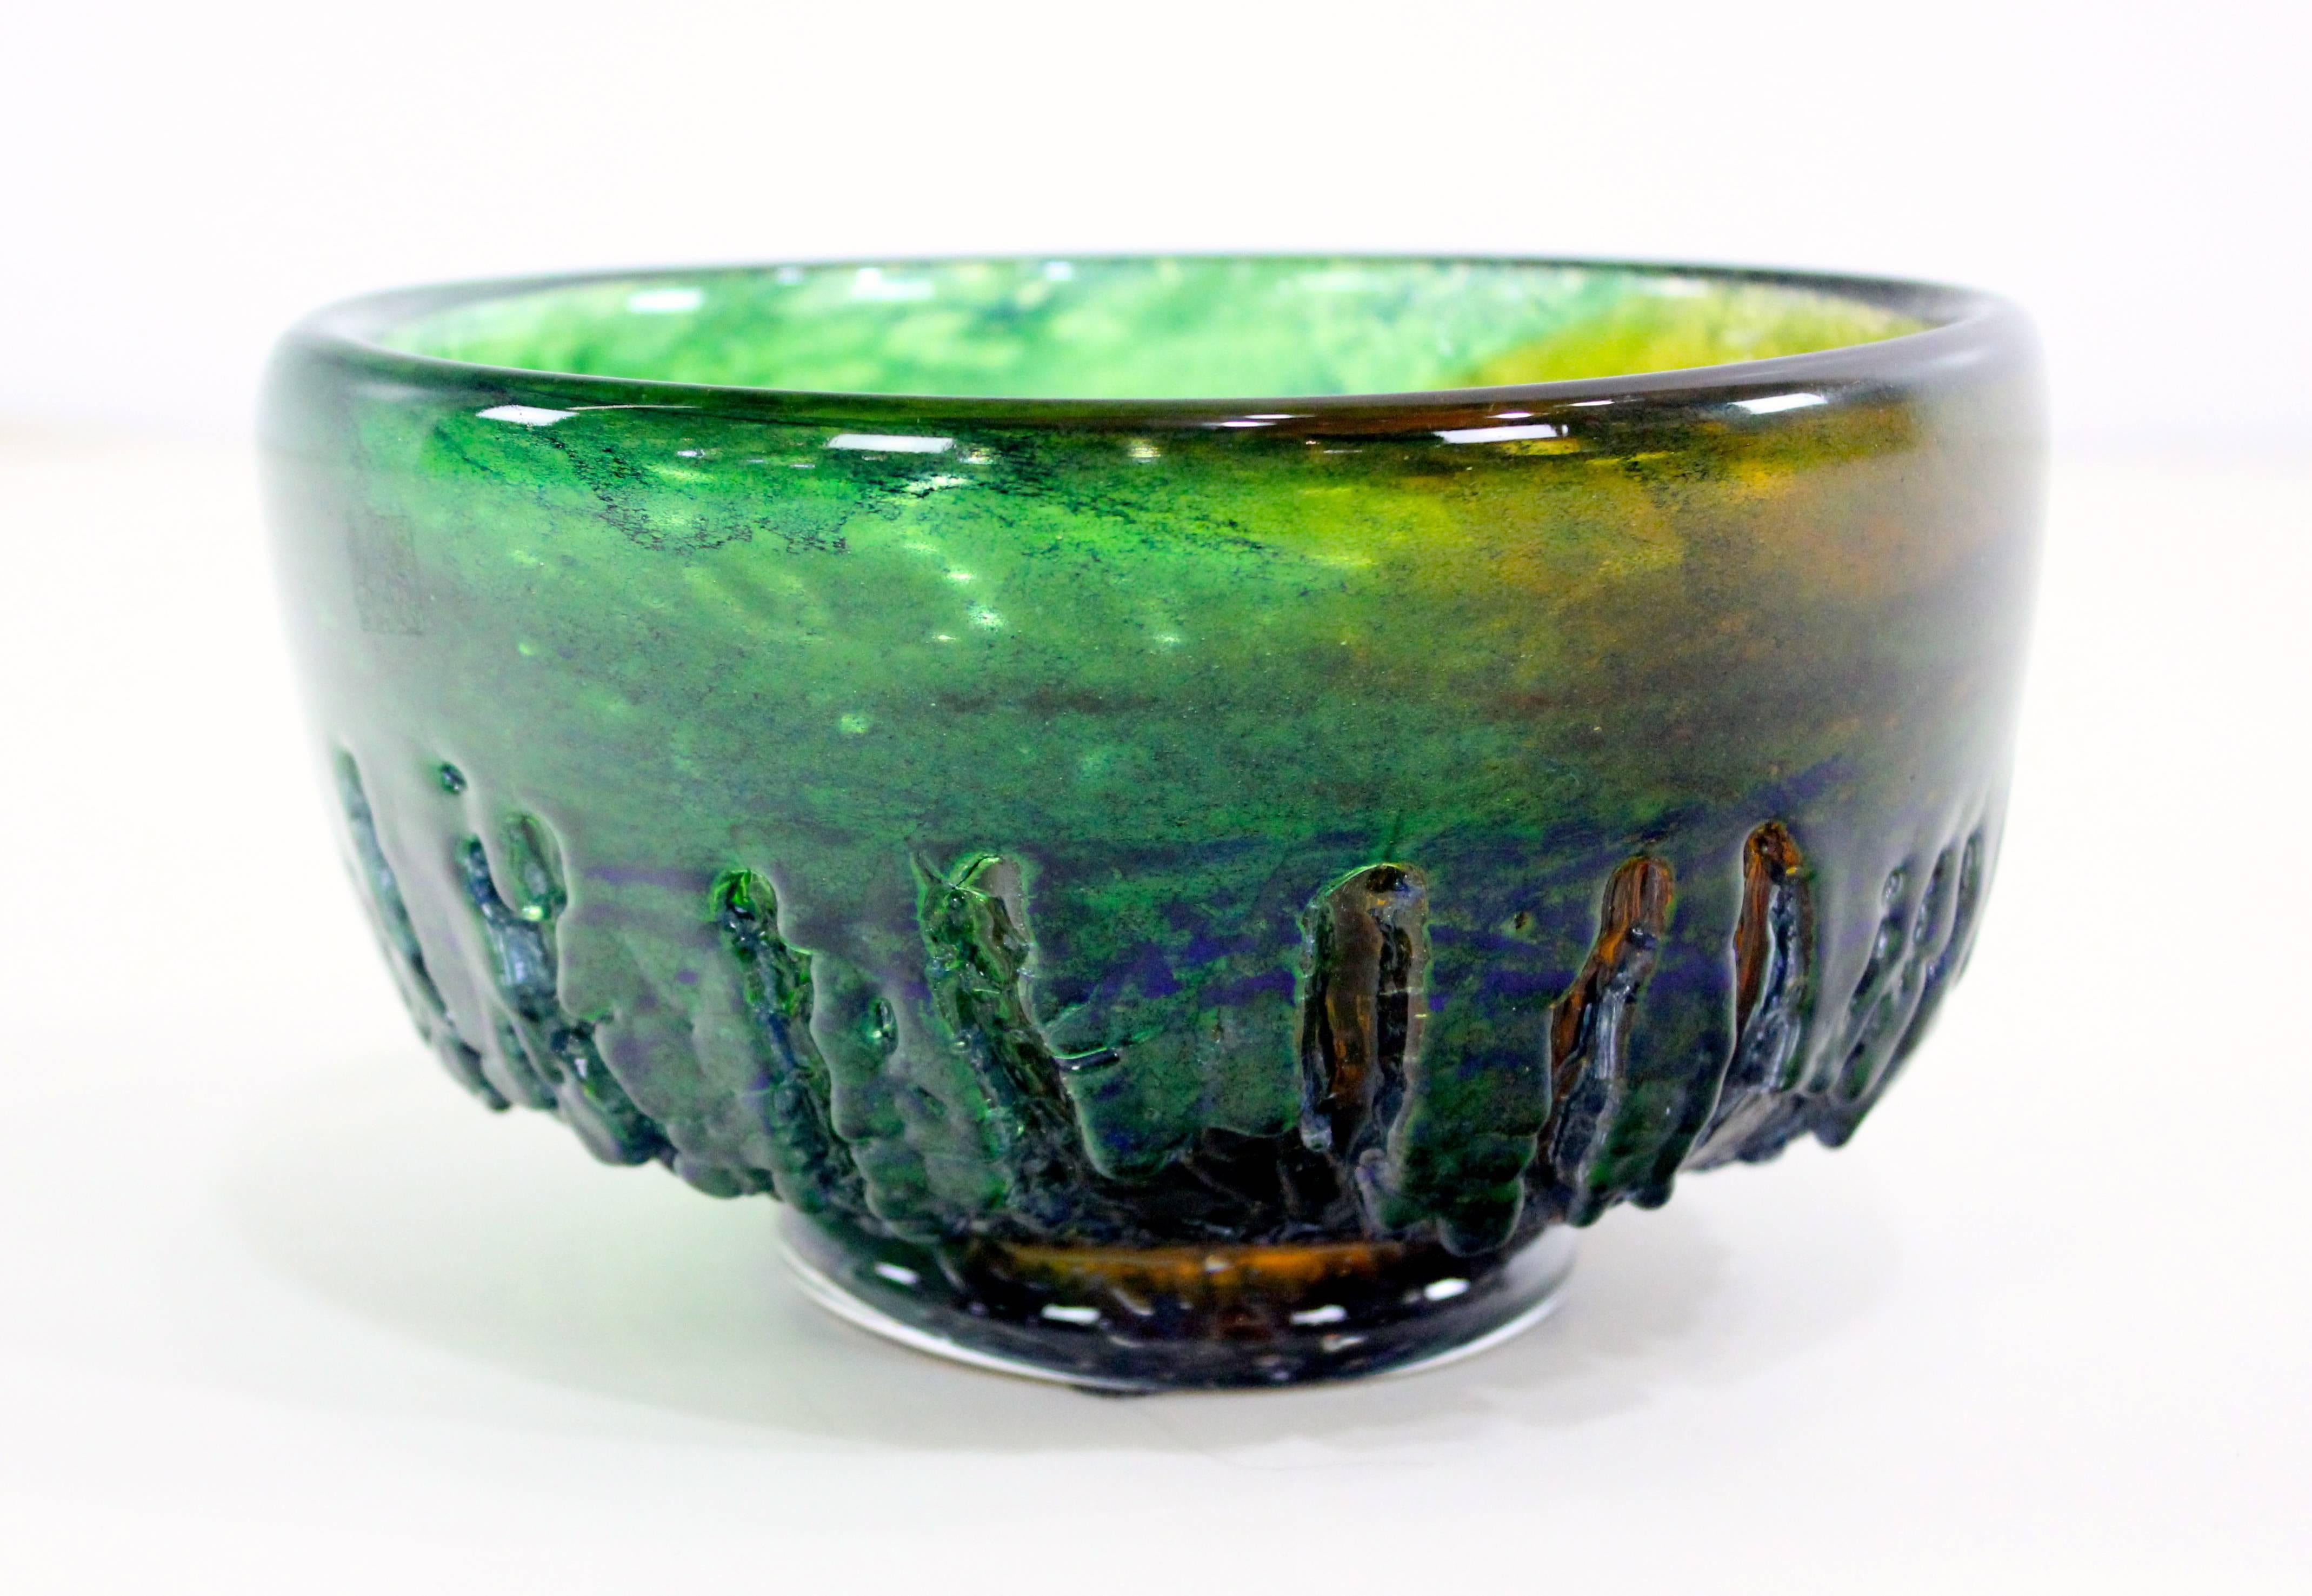 Scandinavian Modern art glass bowl by Goran Warff for Kosta.
1960s studio piece.
Bold, bleeding saturated colors.
Hand formed and inscribed with molten texture.
Matchless quality and price.
Low freight and quick ship.